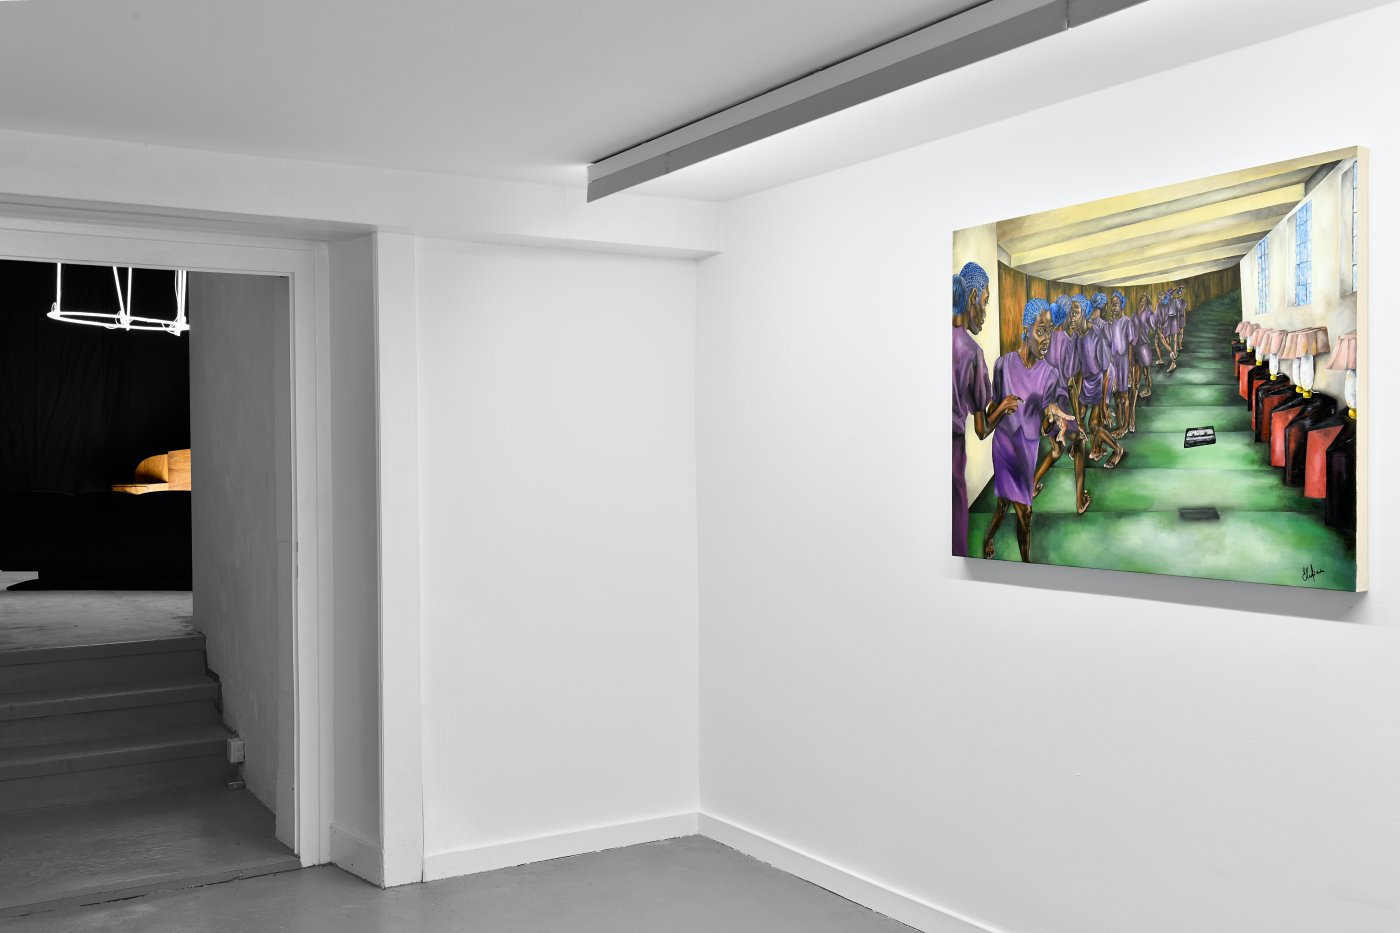 Installation image for Colours of my dream, at Fabienne Levy